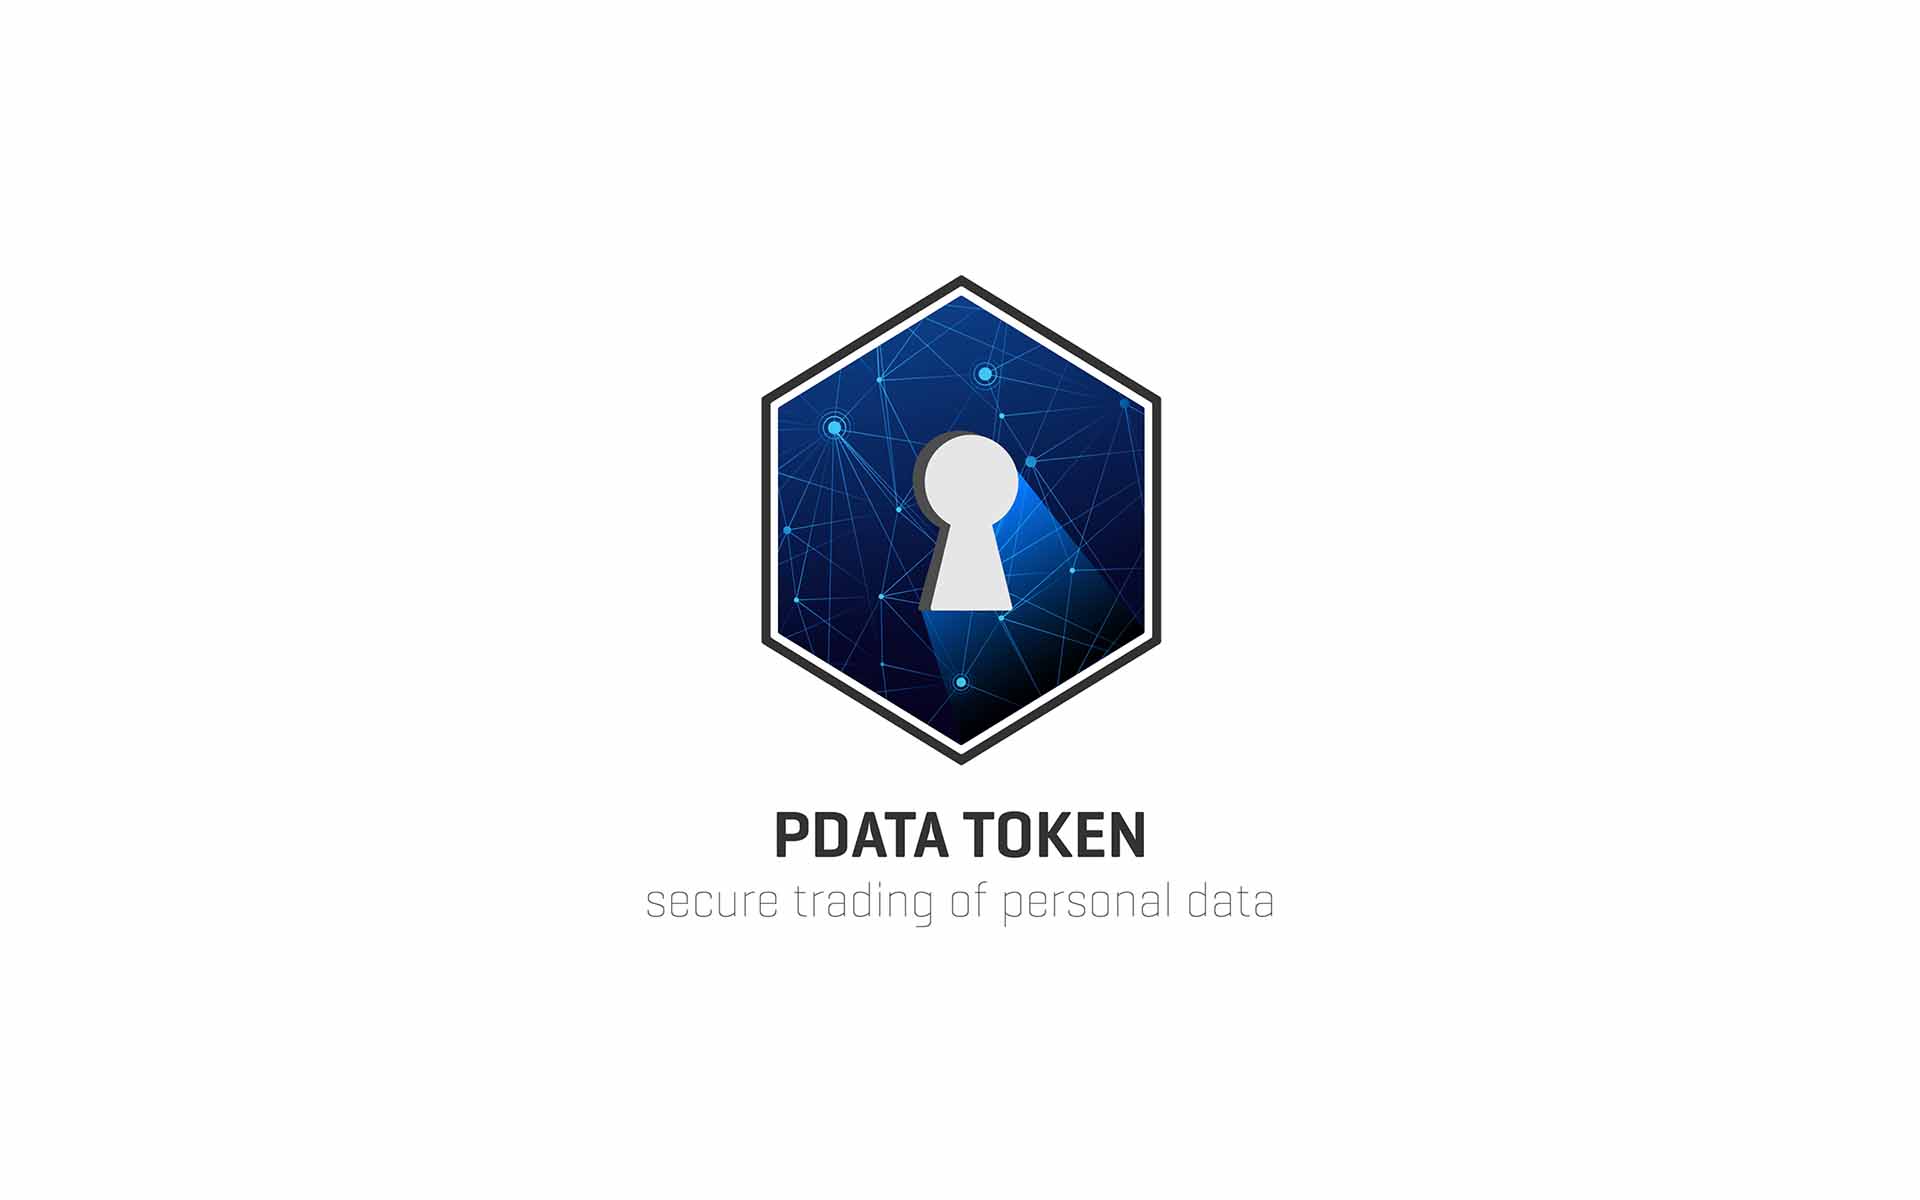 Opiria and the PDATA Token: Helping You Securely & Privately Monetize Your Personal Data